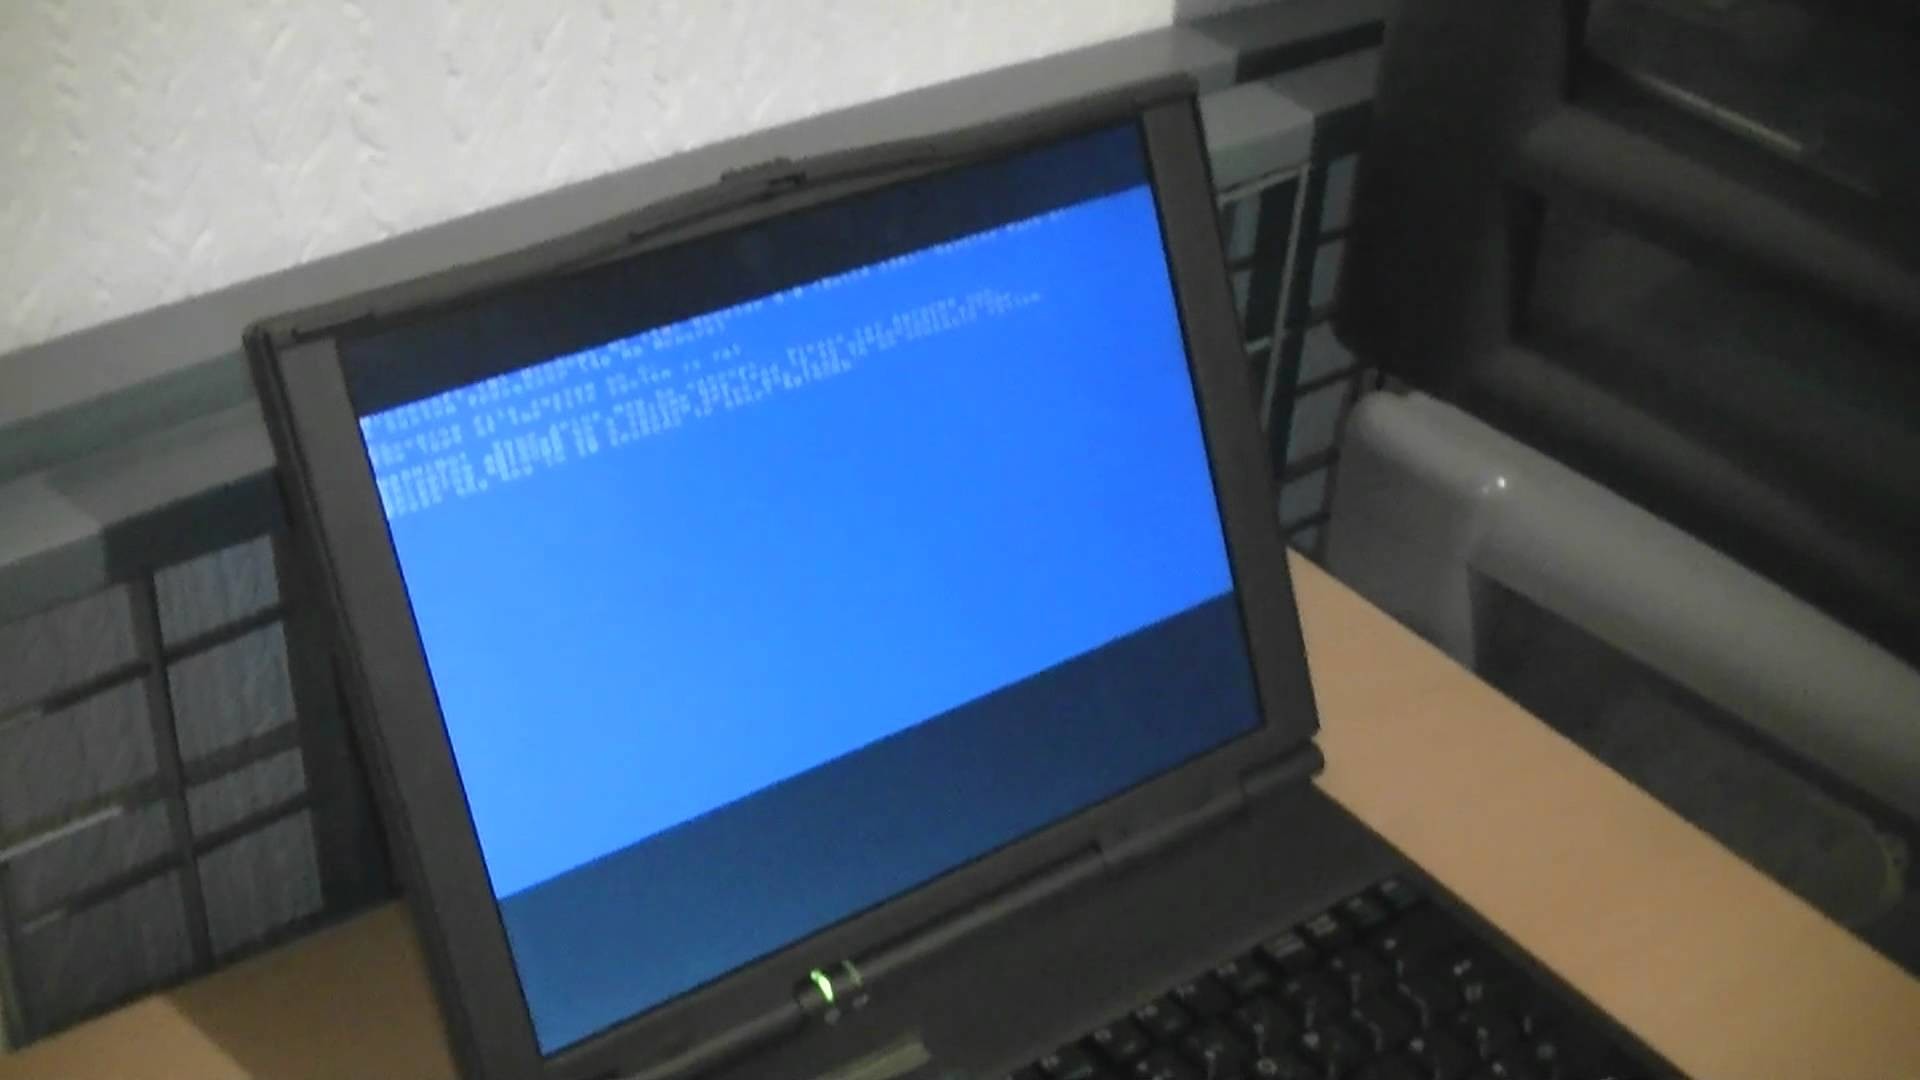 Windows NT 4.0 booting up on the AST Ascentia P Series